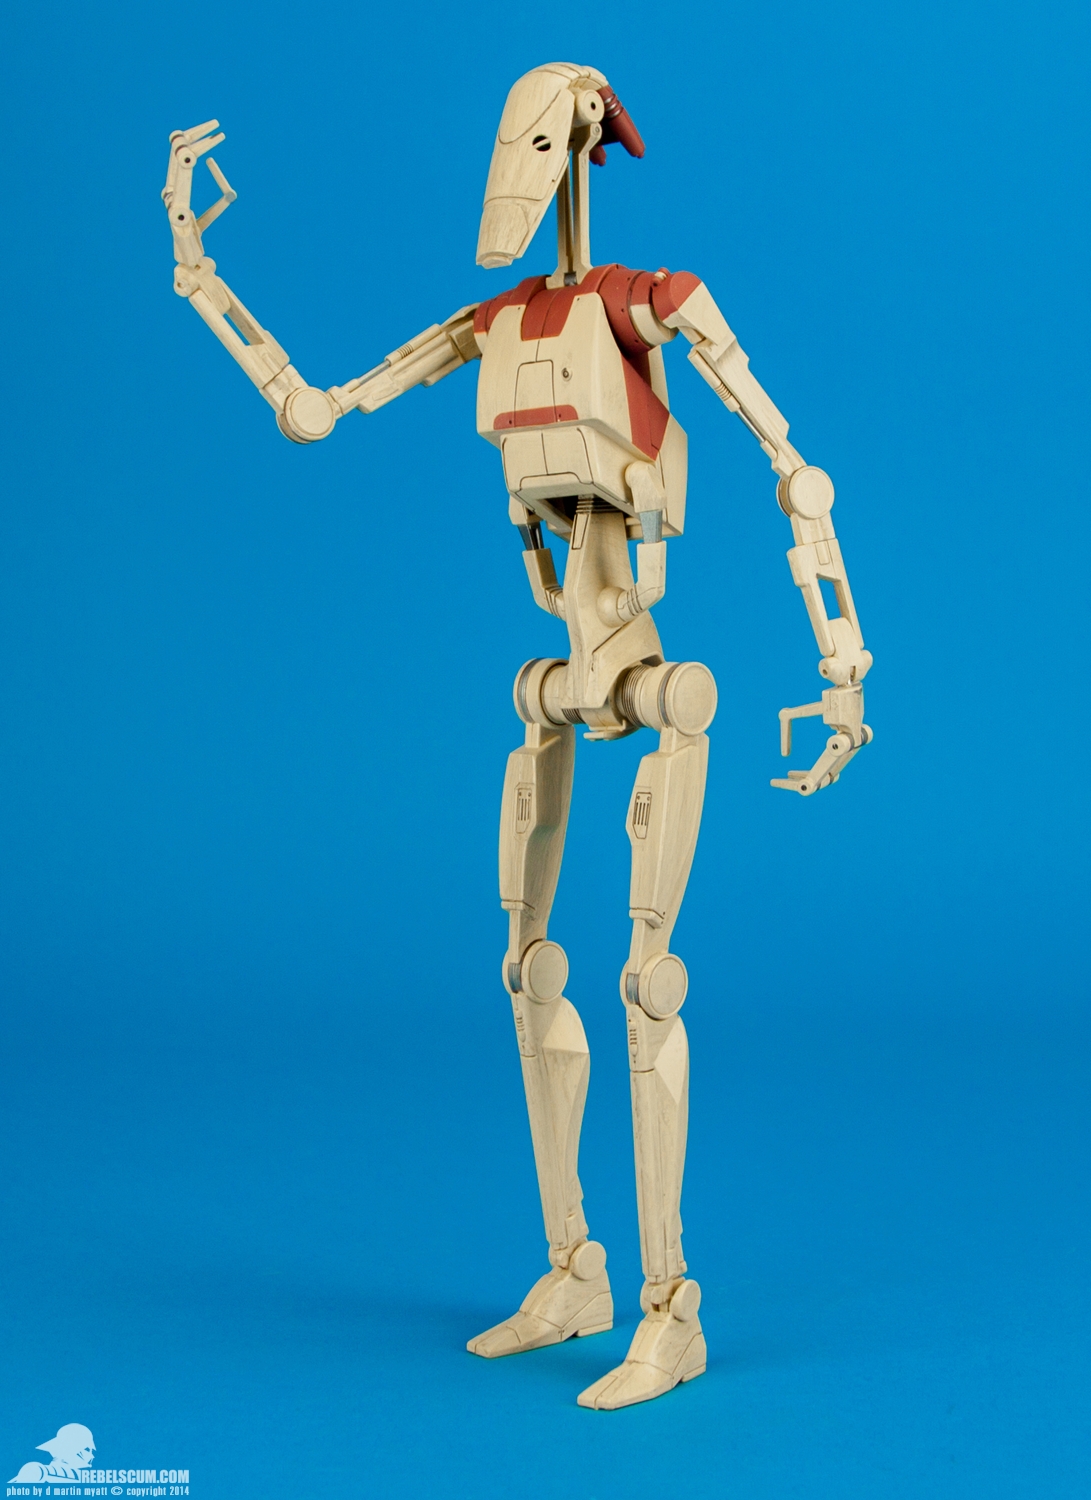 Security-Droids-Sixth-Scale-Sideshow-Collectibles-007.jpg